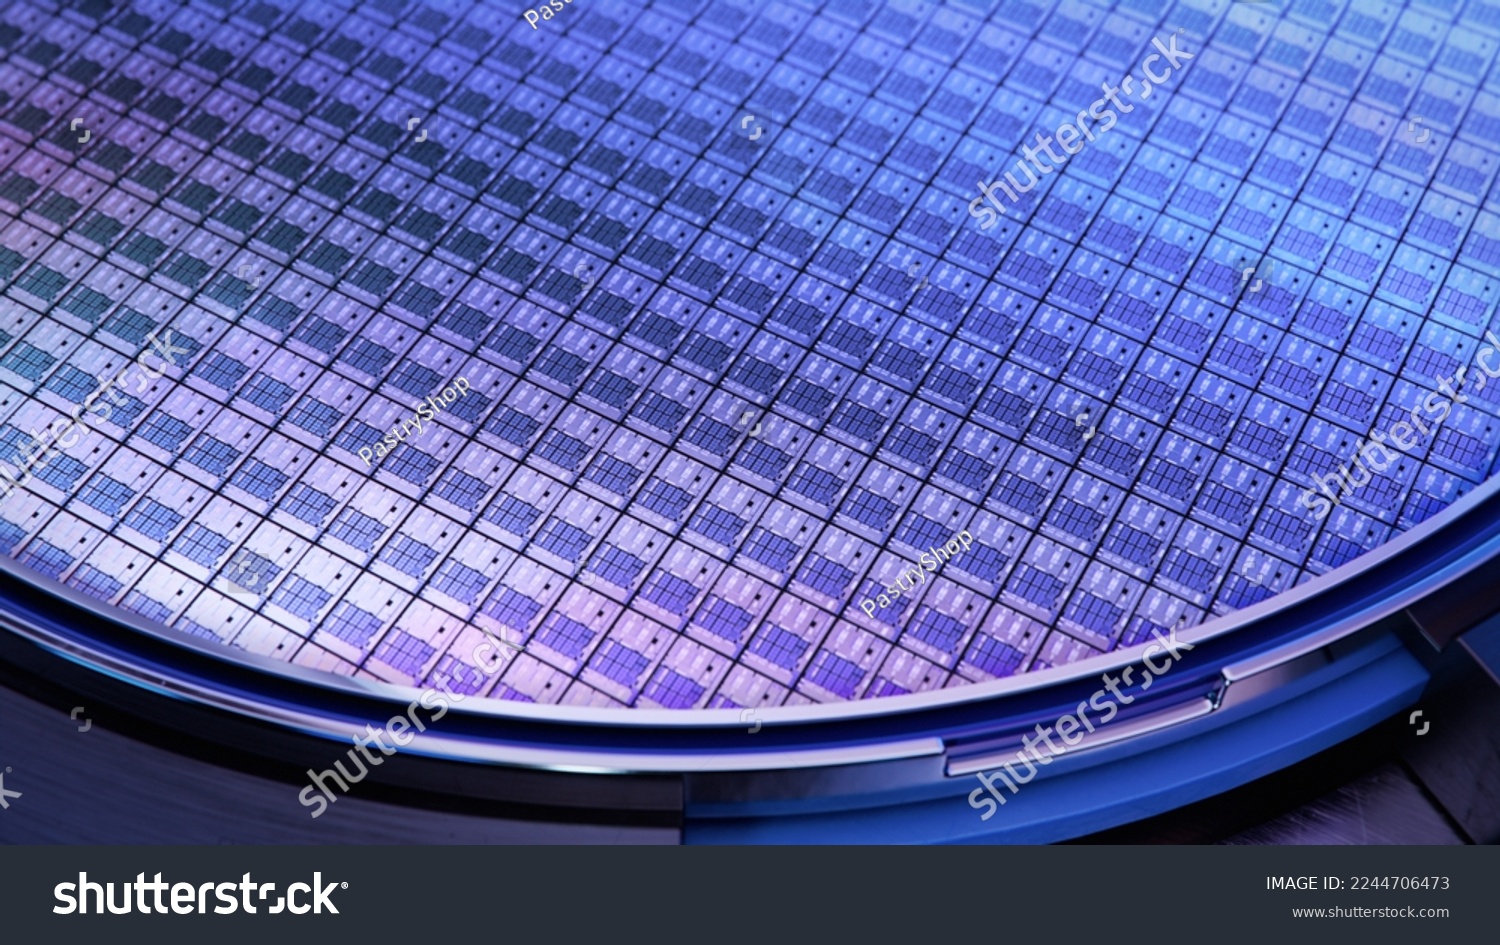 Macro Shot of a Silicon Wafer with Computer Chips during Manufacturing Process at Fab or Foundry. Semicondutor Wafer Texture. #2244706473